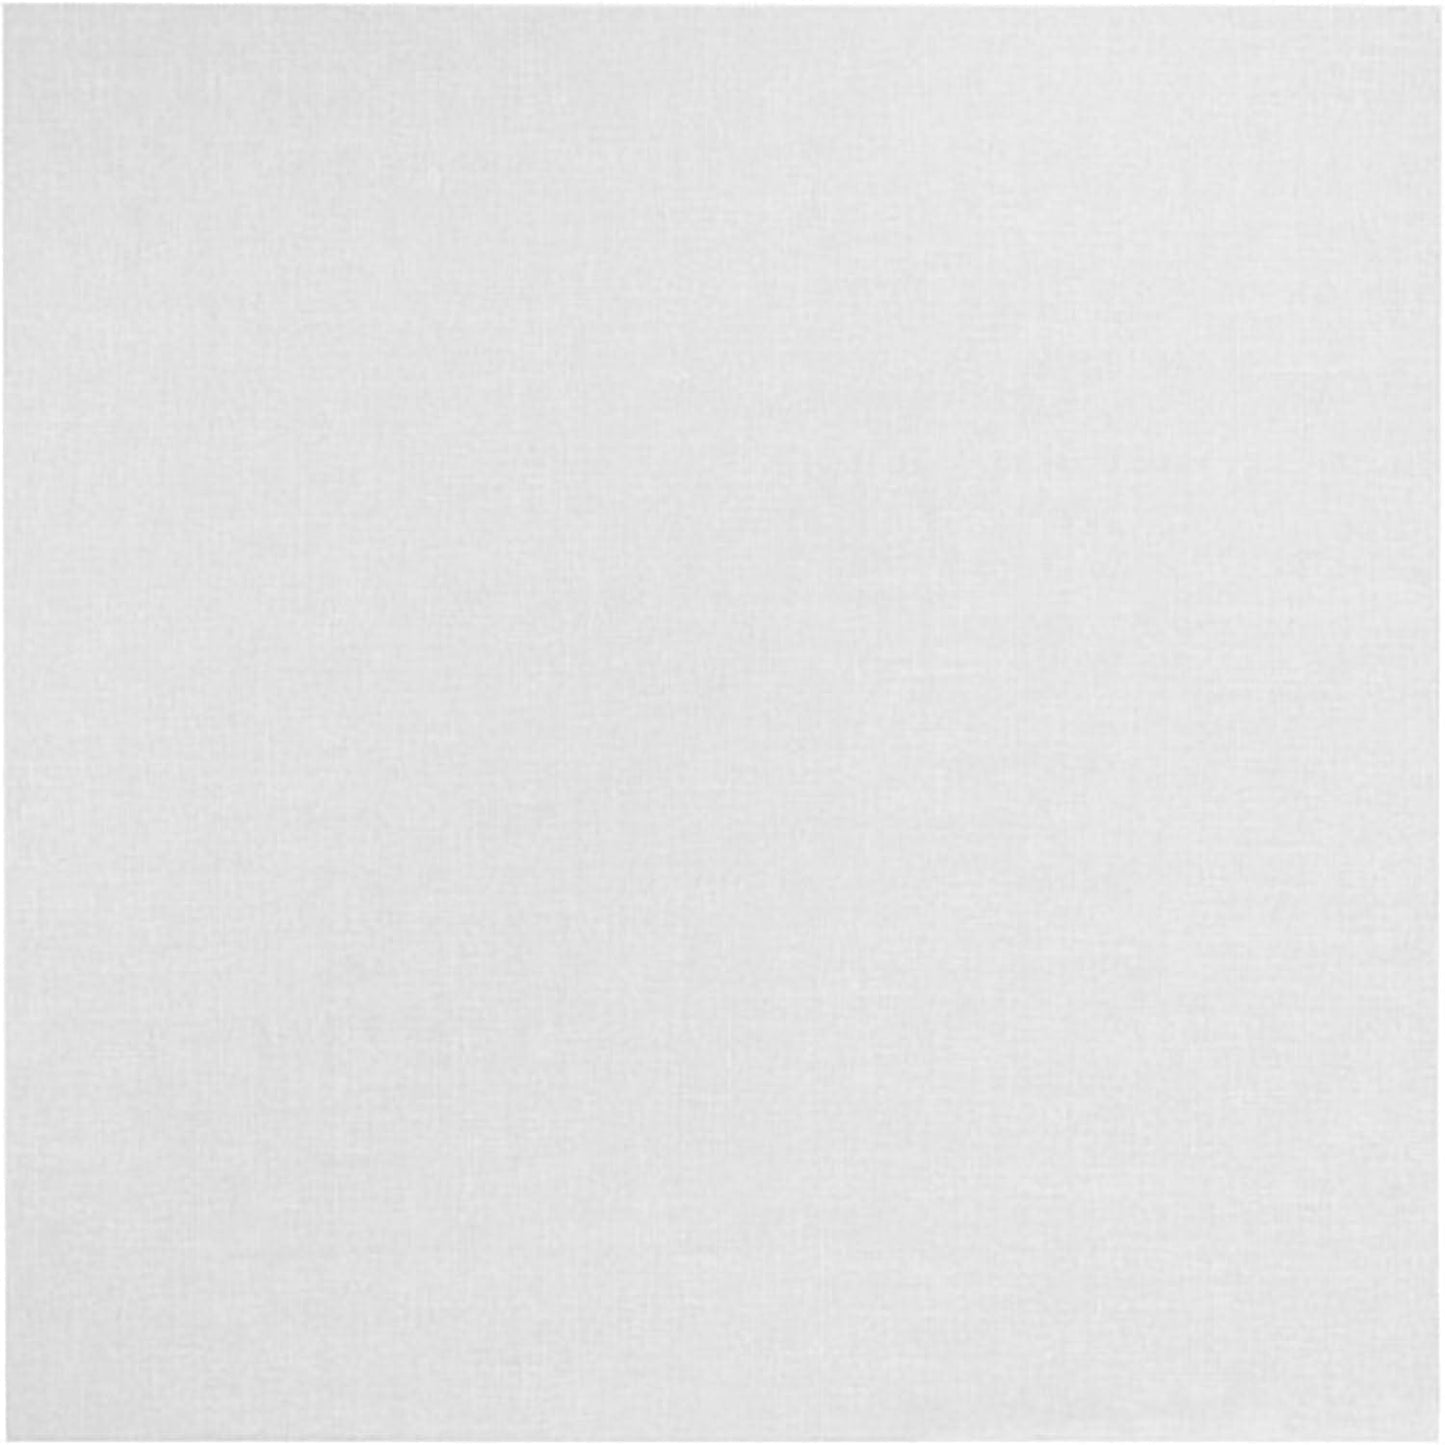 Primacoustic F102-4848-01 Square Edge 48 x 48 x 2 Inch Panel - PSSL ProSound and Stage Lighting